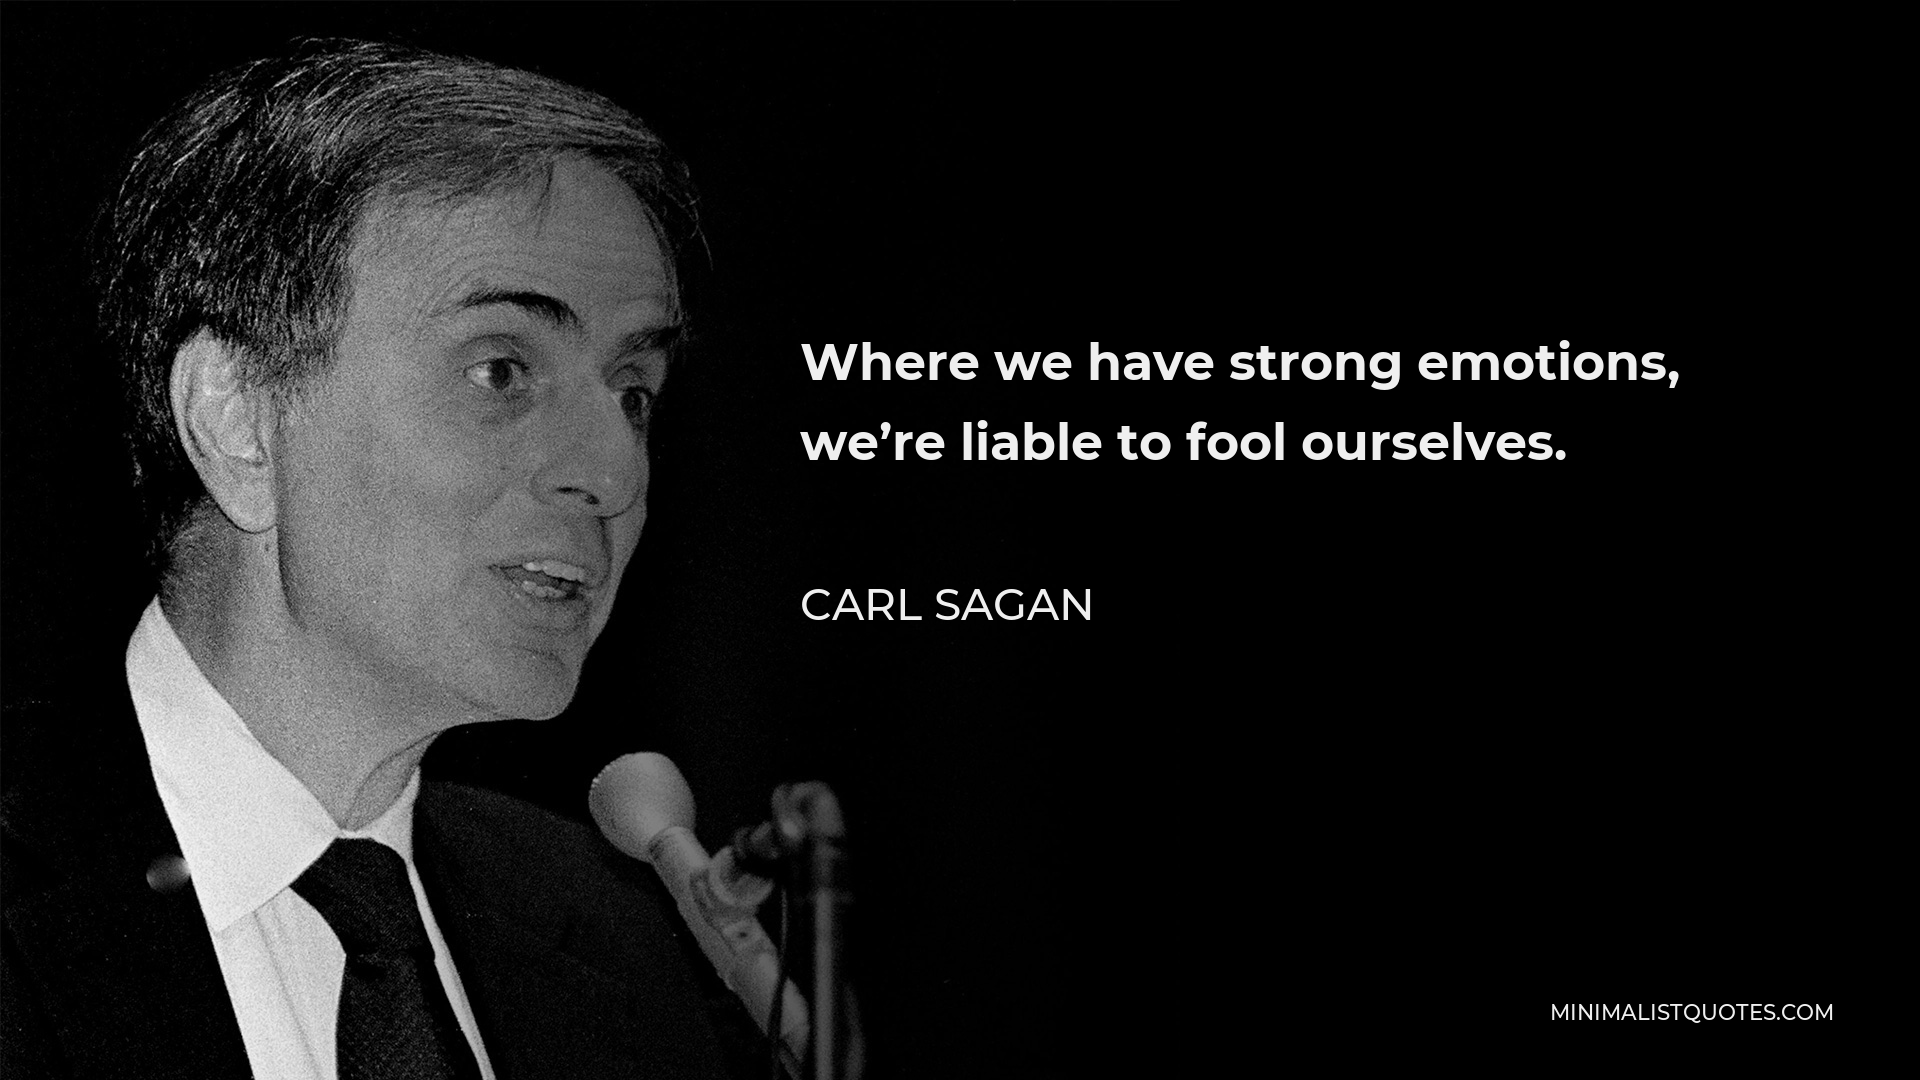 Carl Sagan Quote - Where we have strong emotions, we’re liable to fool ourselves.